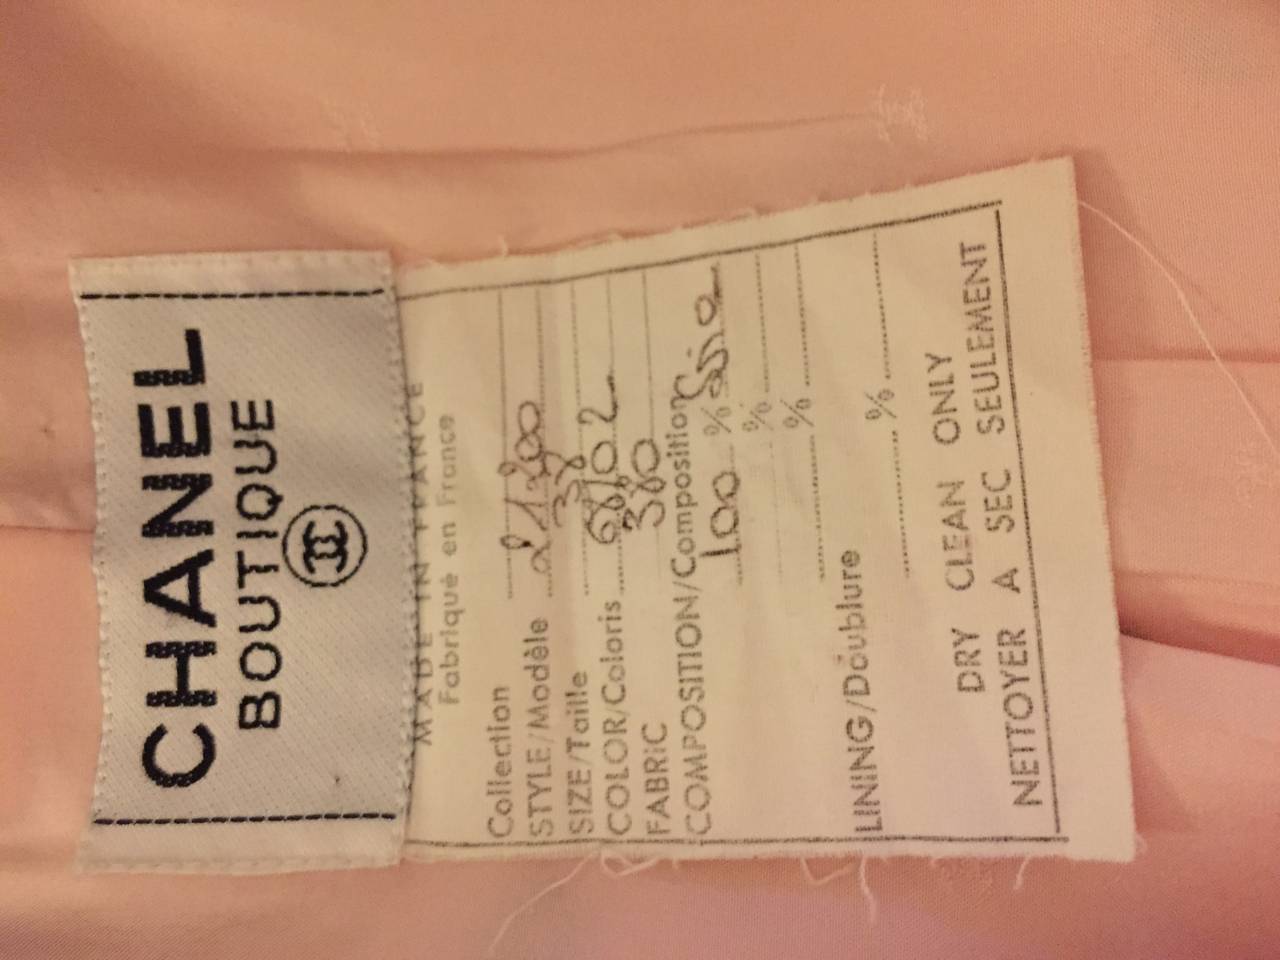 Chanel Pink Blazer with Black Polka Dots - Size 38 In Excellent Condition For Sale In Boca Raton, FL